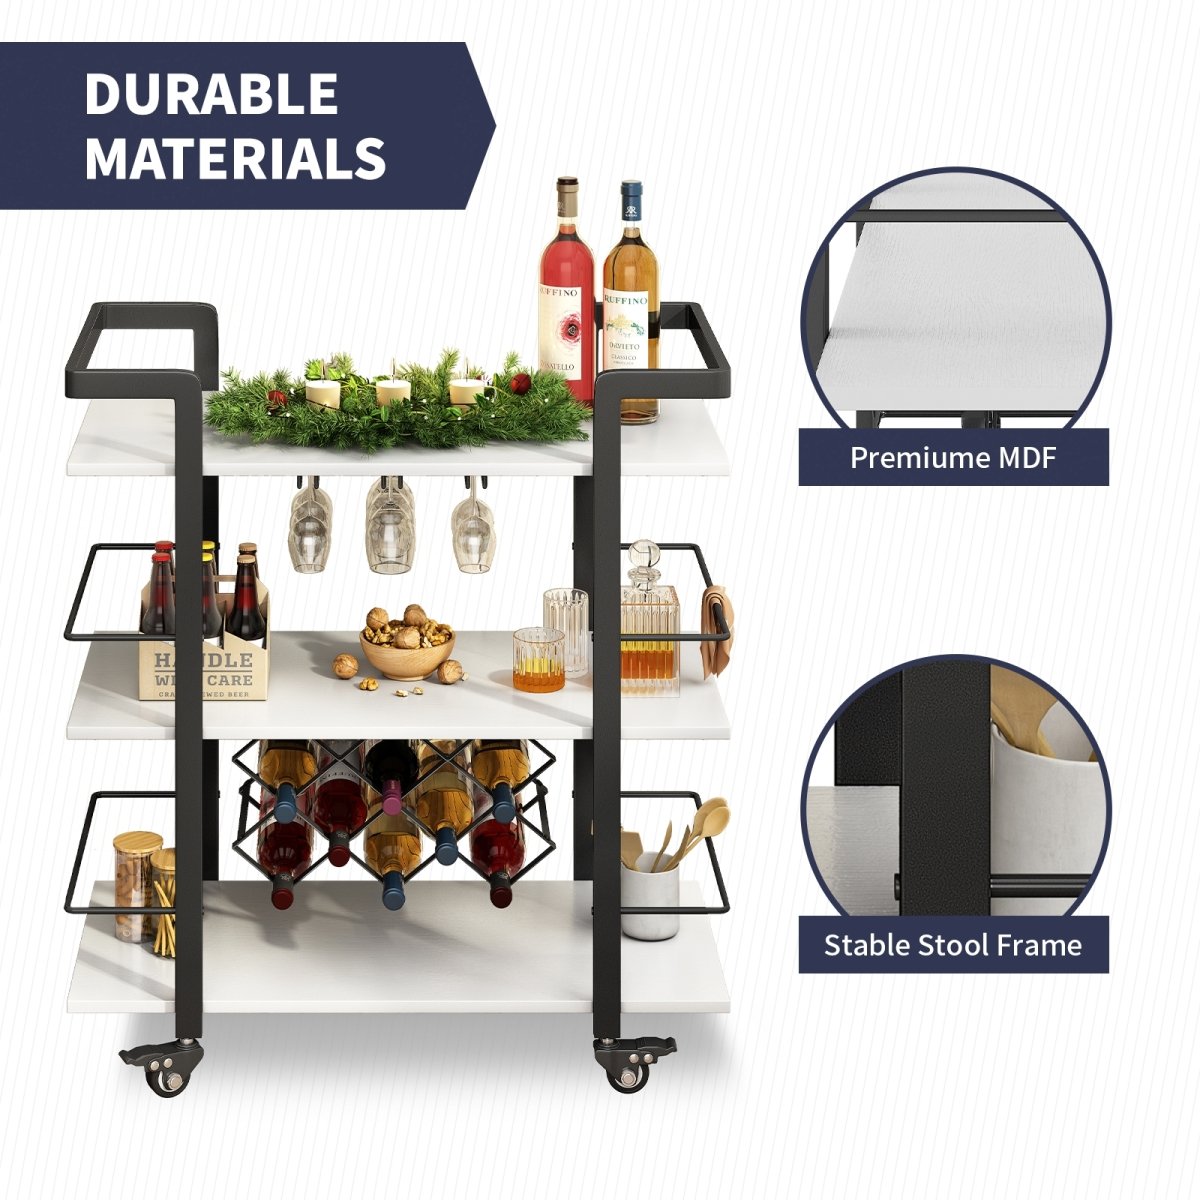 Bar Carts | Home Bar & Serving Carts with Wine Bottle Storage and Locking Casters - MjkoneCabinets